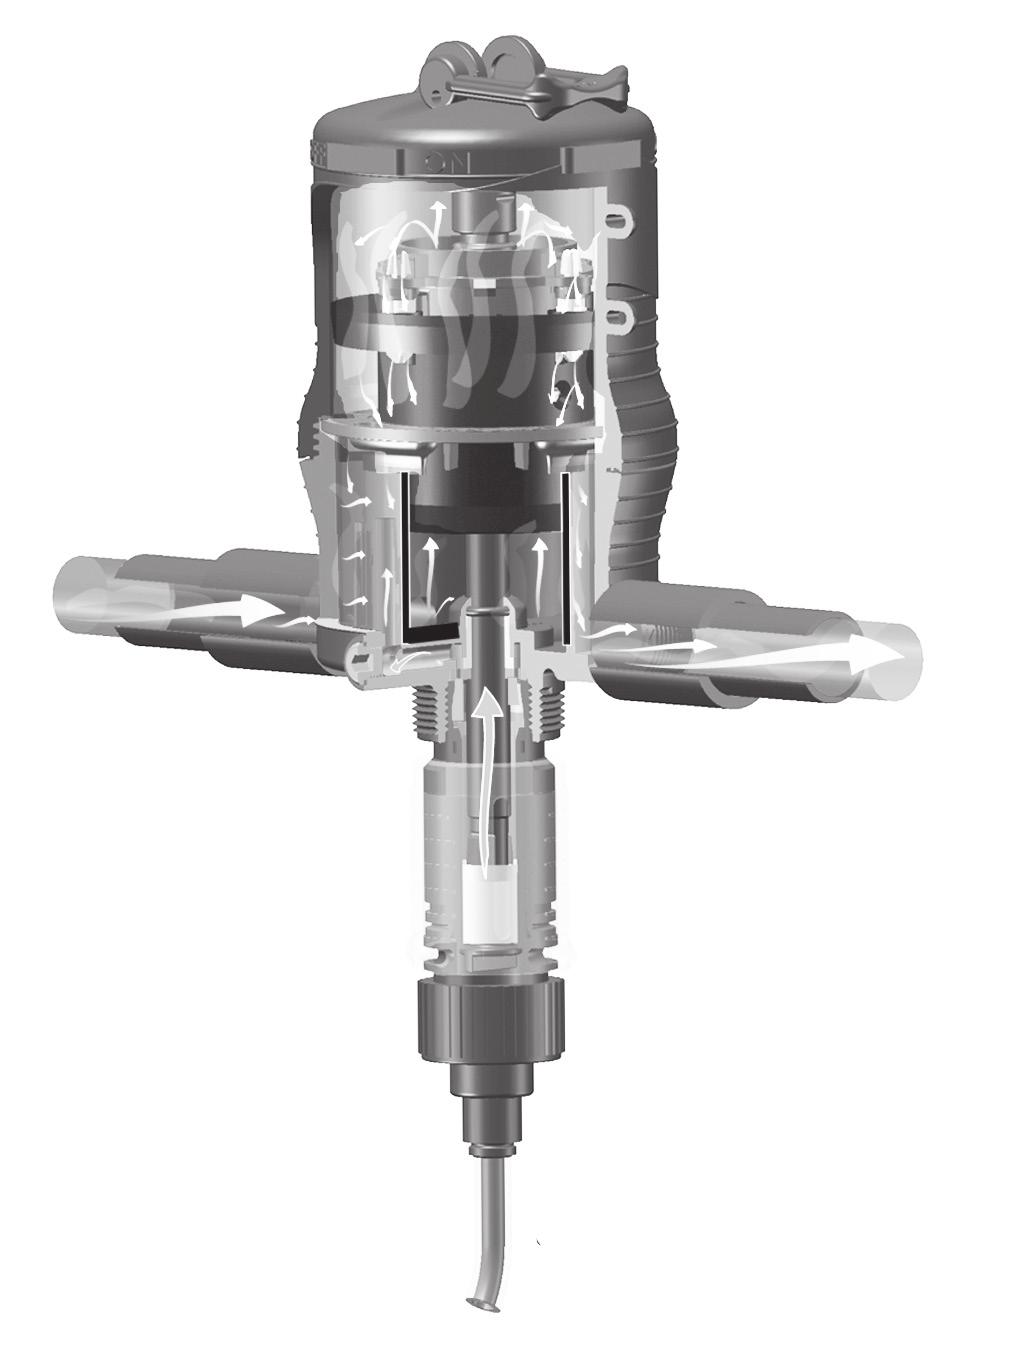 Operating Principle Accurate and Reliable Installed directly in the fluid supply line, the injector operates without electricity, using fluid (water) pressure as the power source.